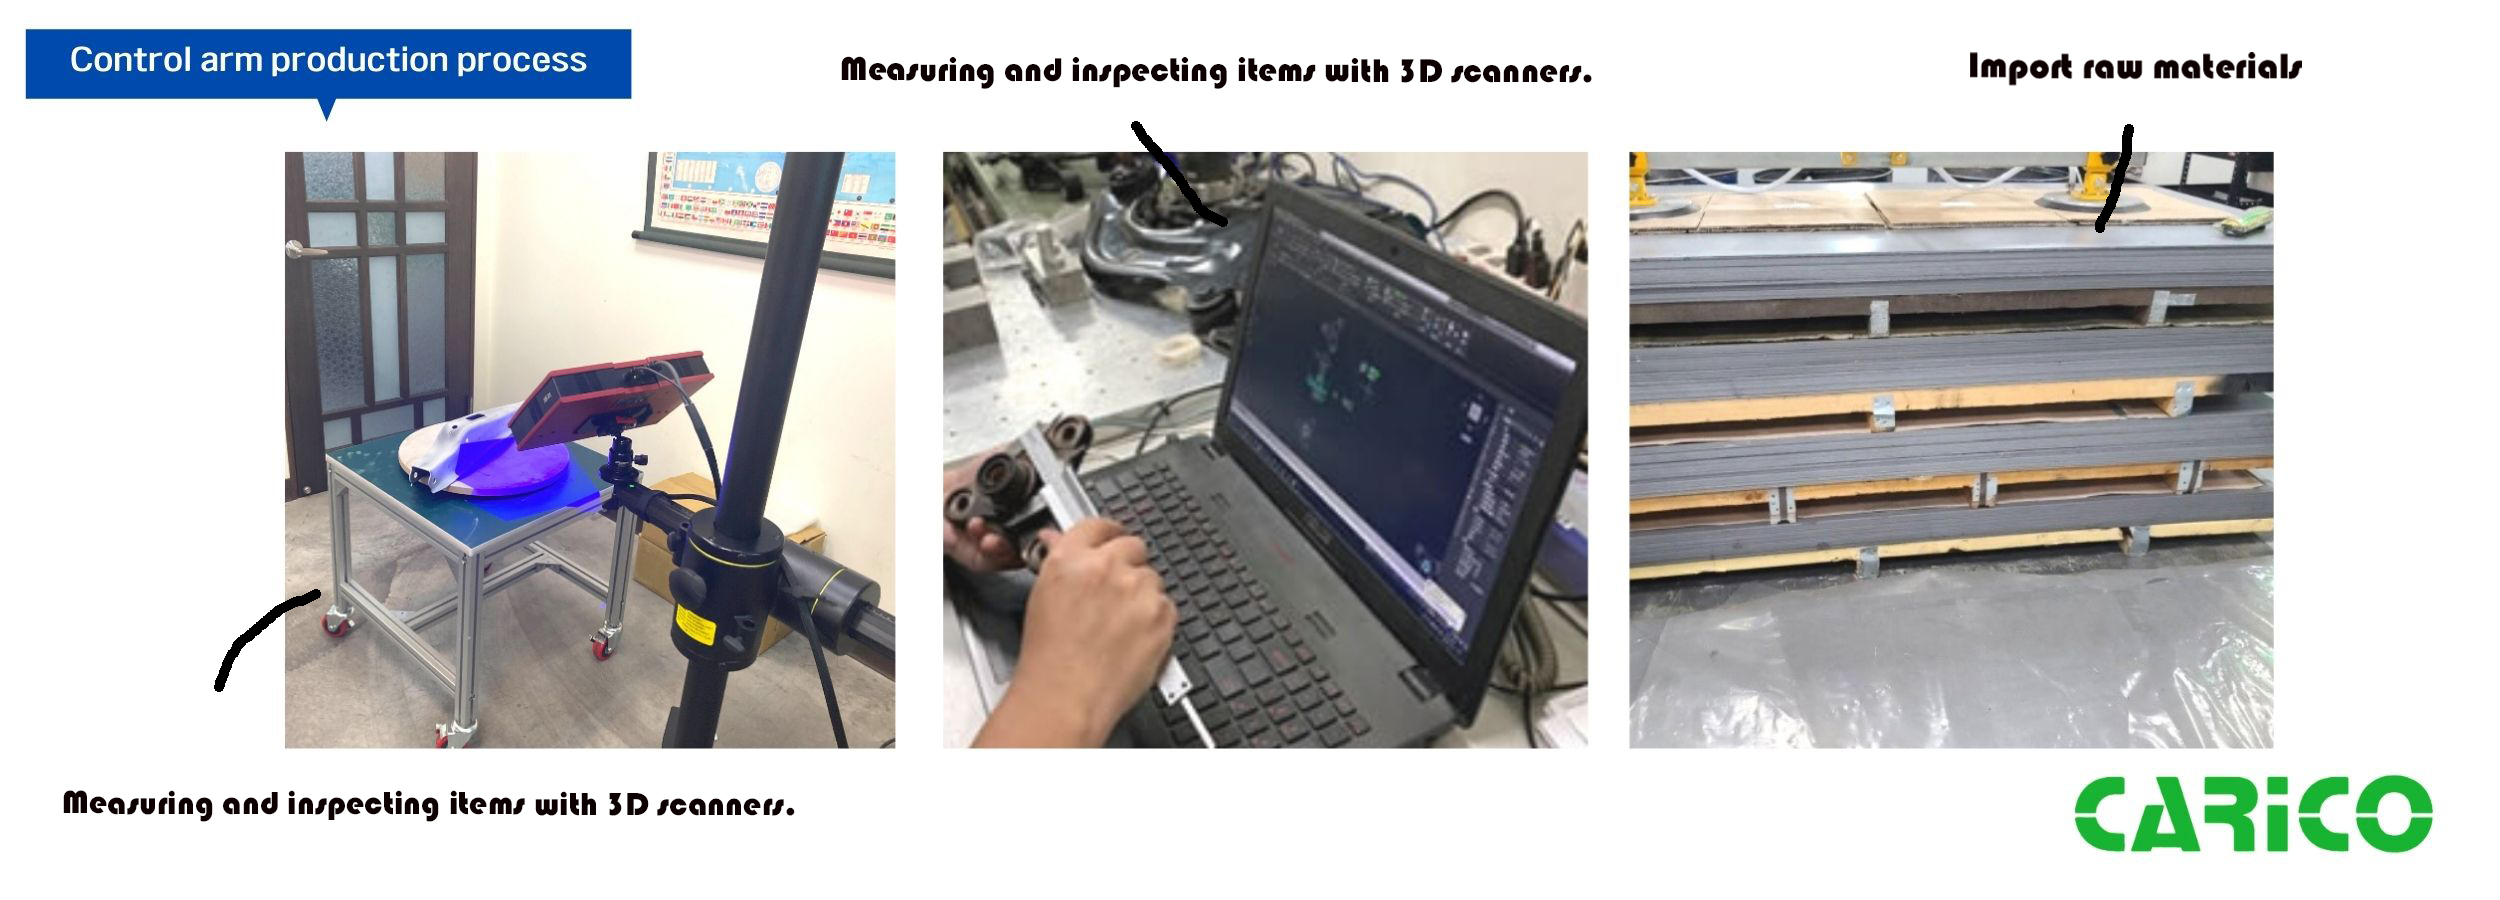 measuring and inspecting item with 3D scanner 